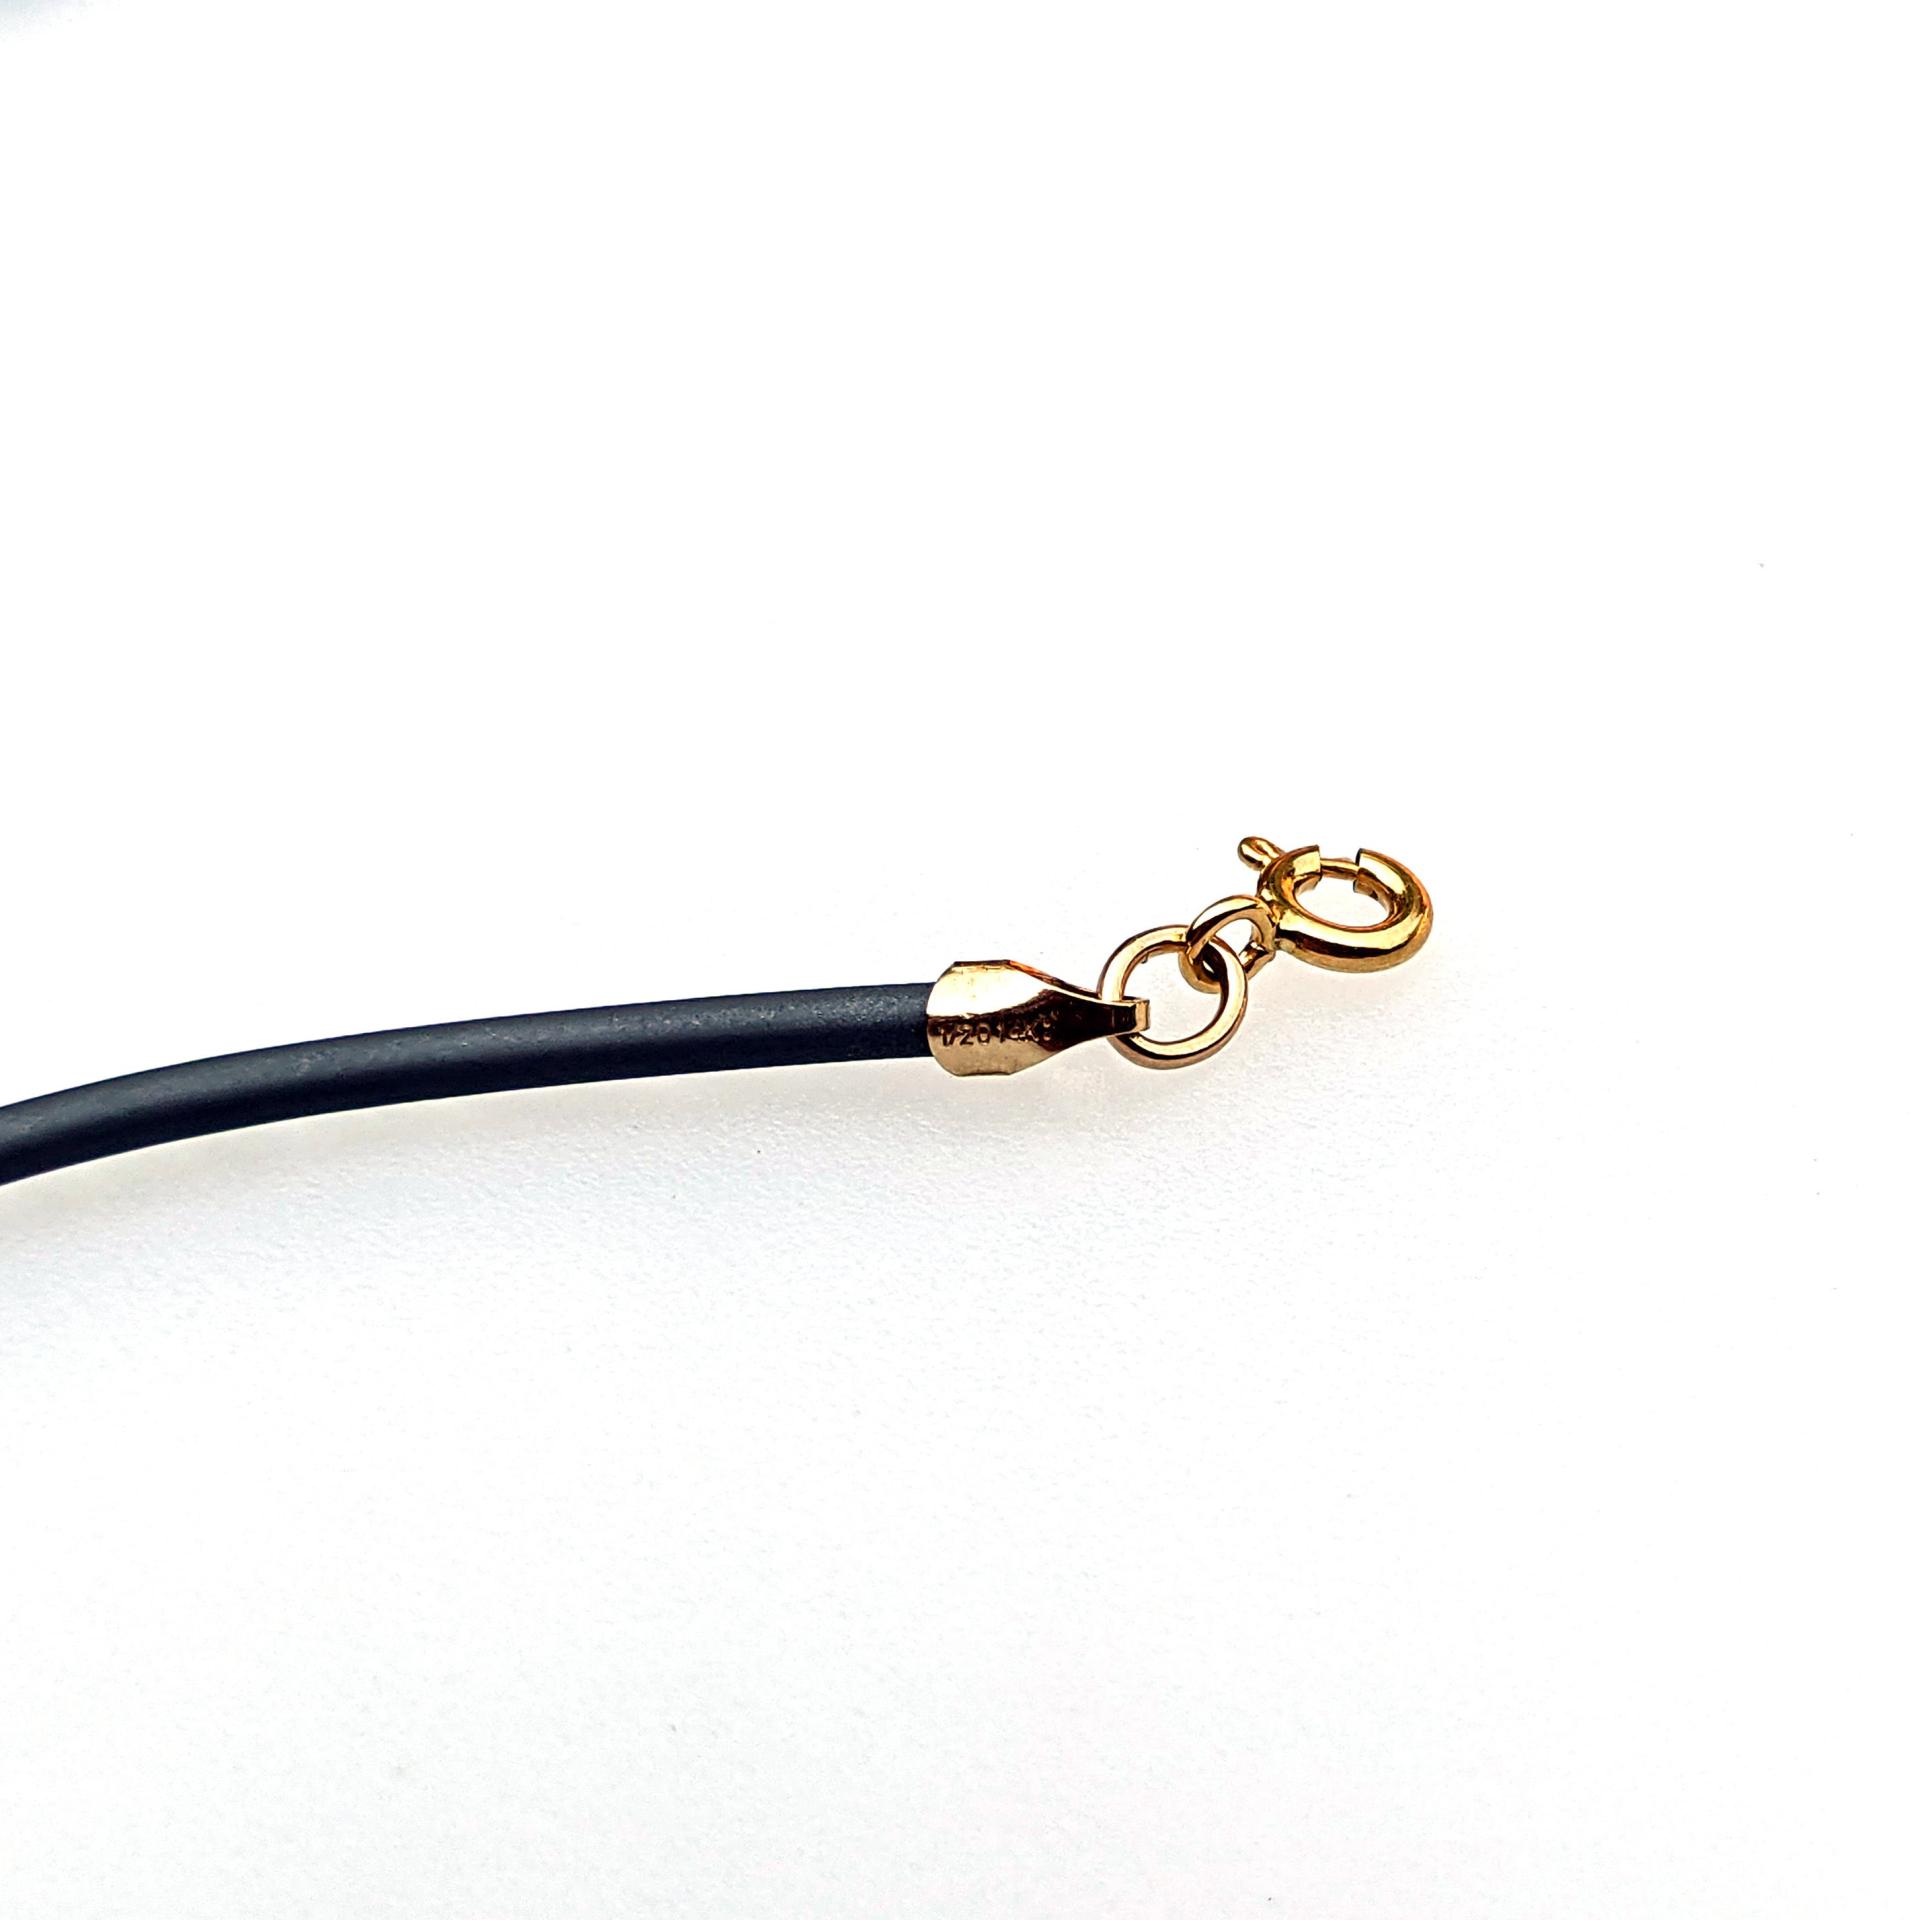 Grey Rubber Cord Necklace, 2 mm, Gold Filled Clasp, Interchangeable, 16", 18", 20", 22", 24"